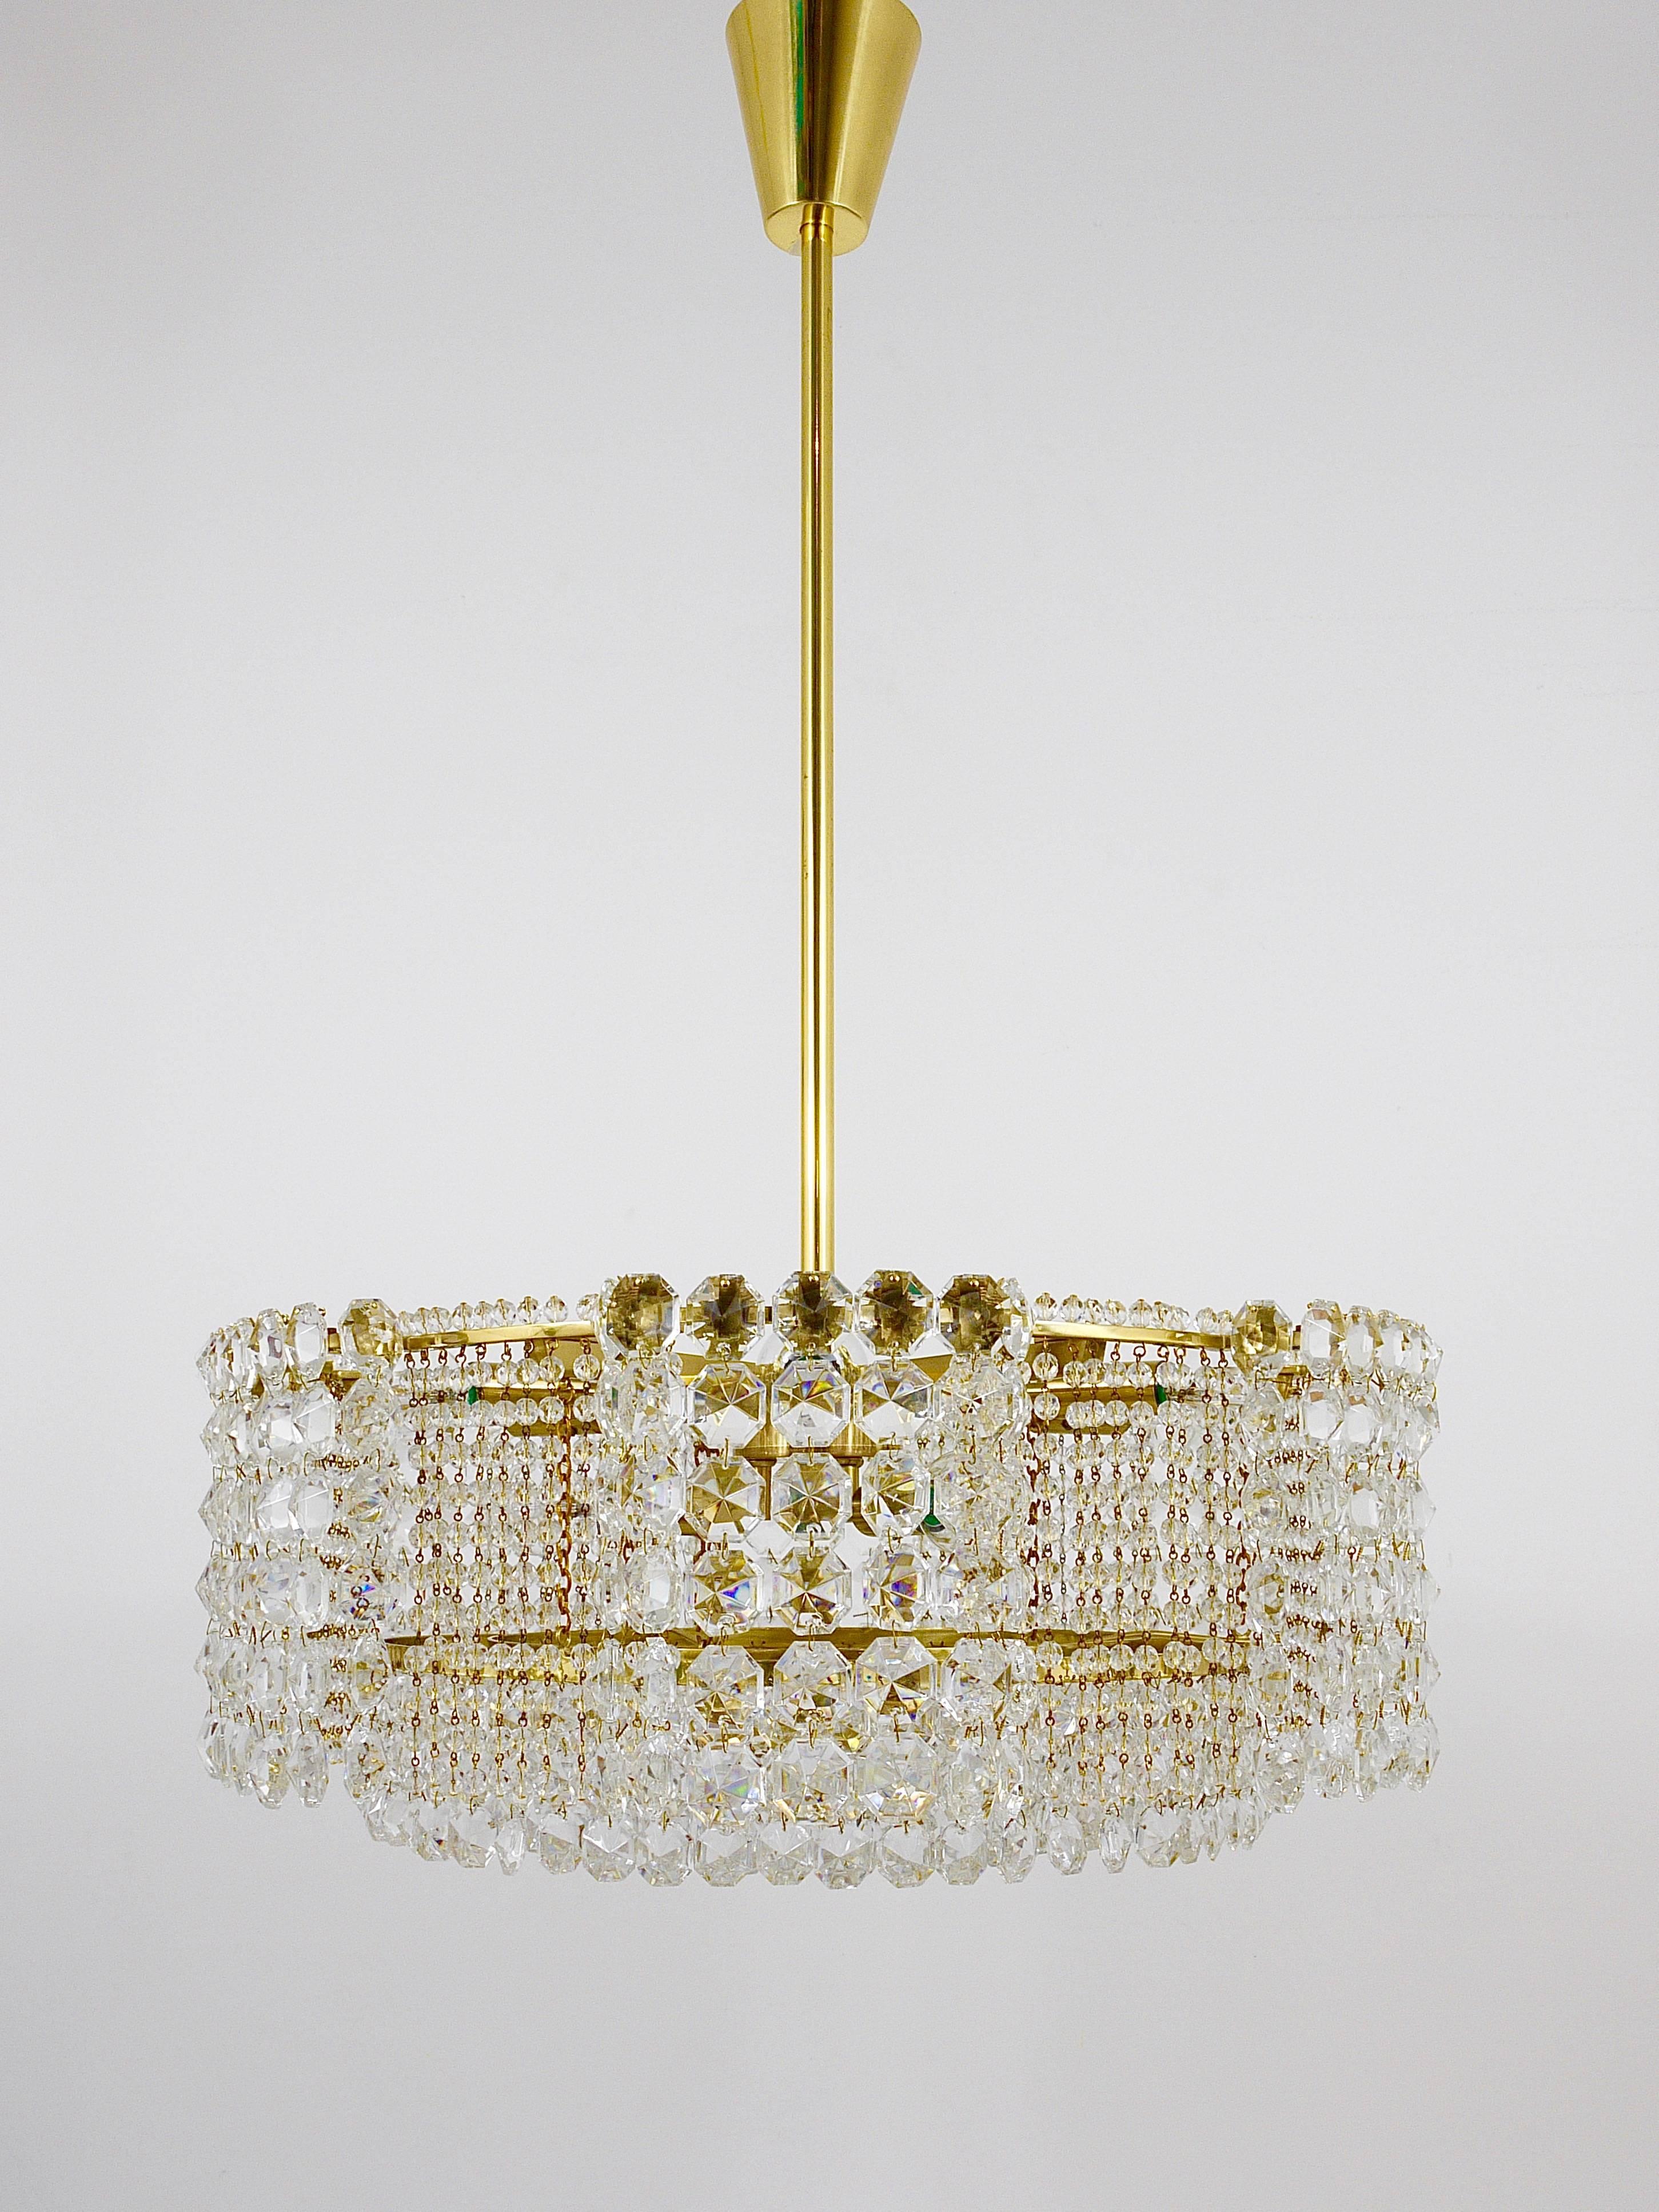 A beautiful and big multi-tiered brass and crystal chandelier by Lobmeyr Vienna from the 1950s. Fully covered by dazzling faceted crystals. This chandelier has nine light sources and has been carefully restored and rewired. In excellent condition.